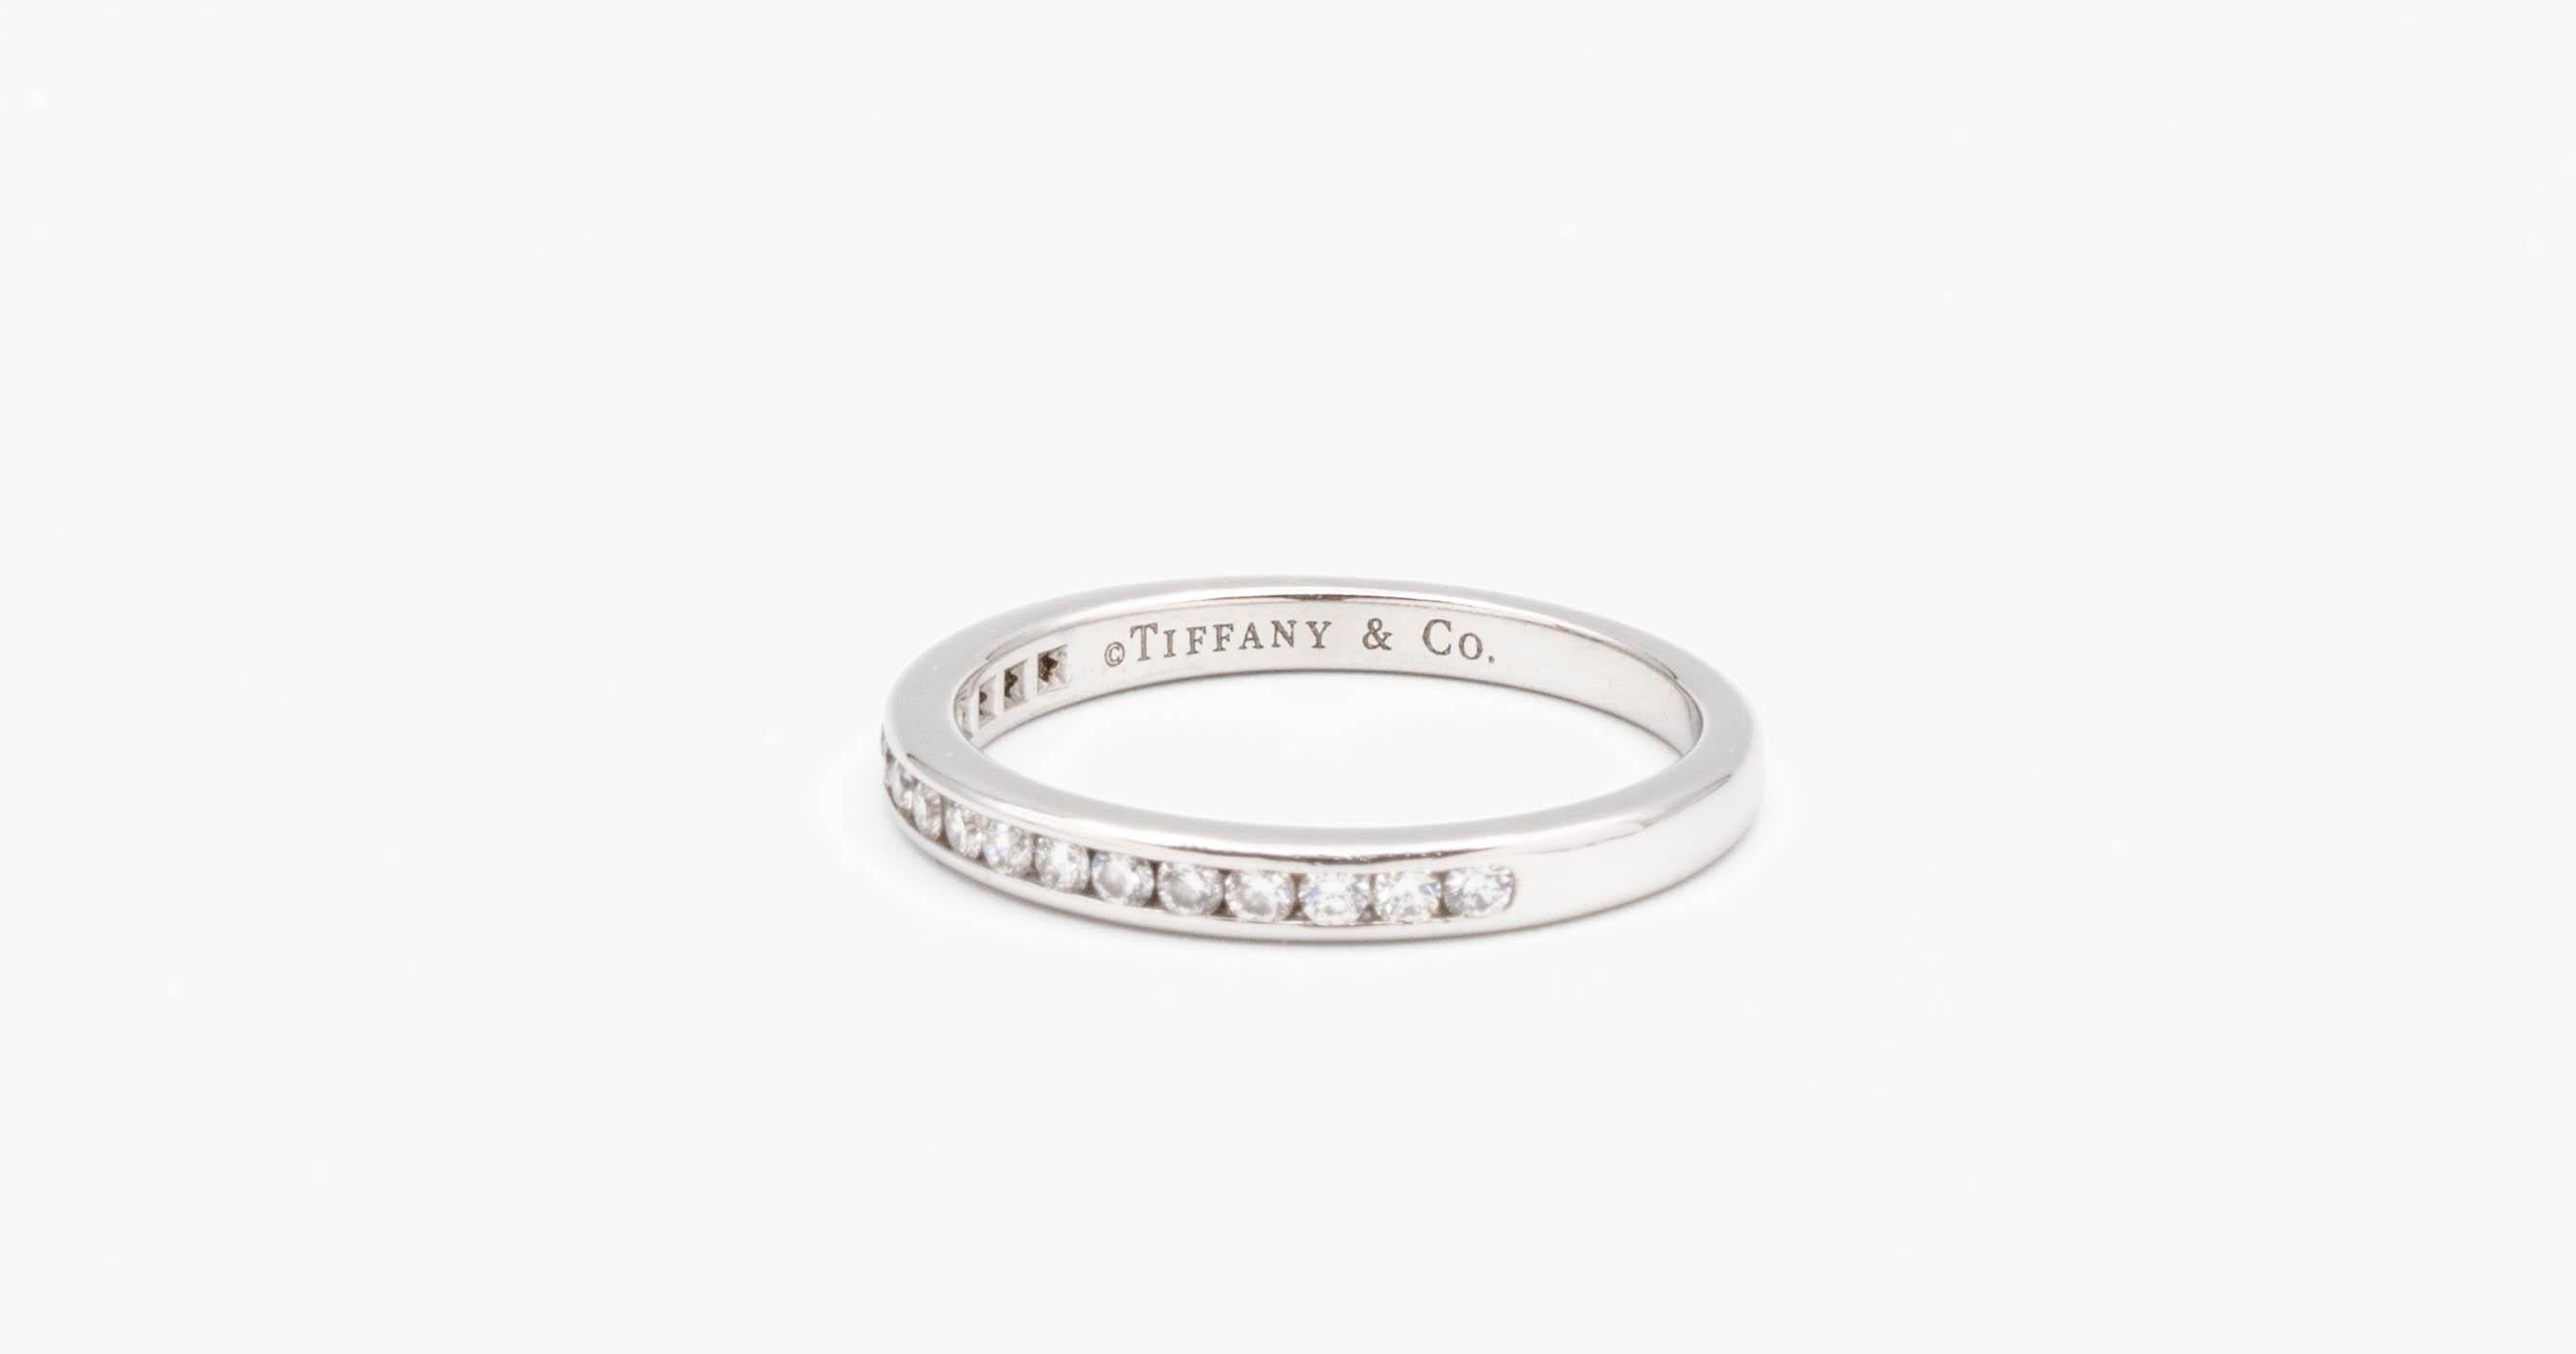 Tiffany & Co Channel set Wedding/Anniversary band finely crafted in Platinum with channel set round brilliant cut diamonds weighing 0.17 cts. in ranging in near colorless F-G  and VVS clarity with no visible inclusions, Very fine quality just as you